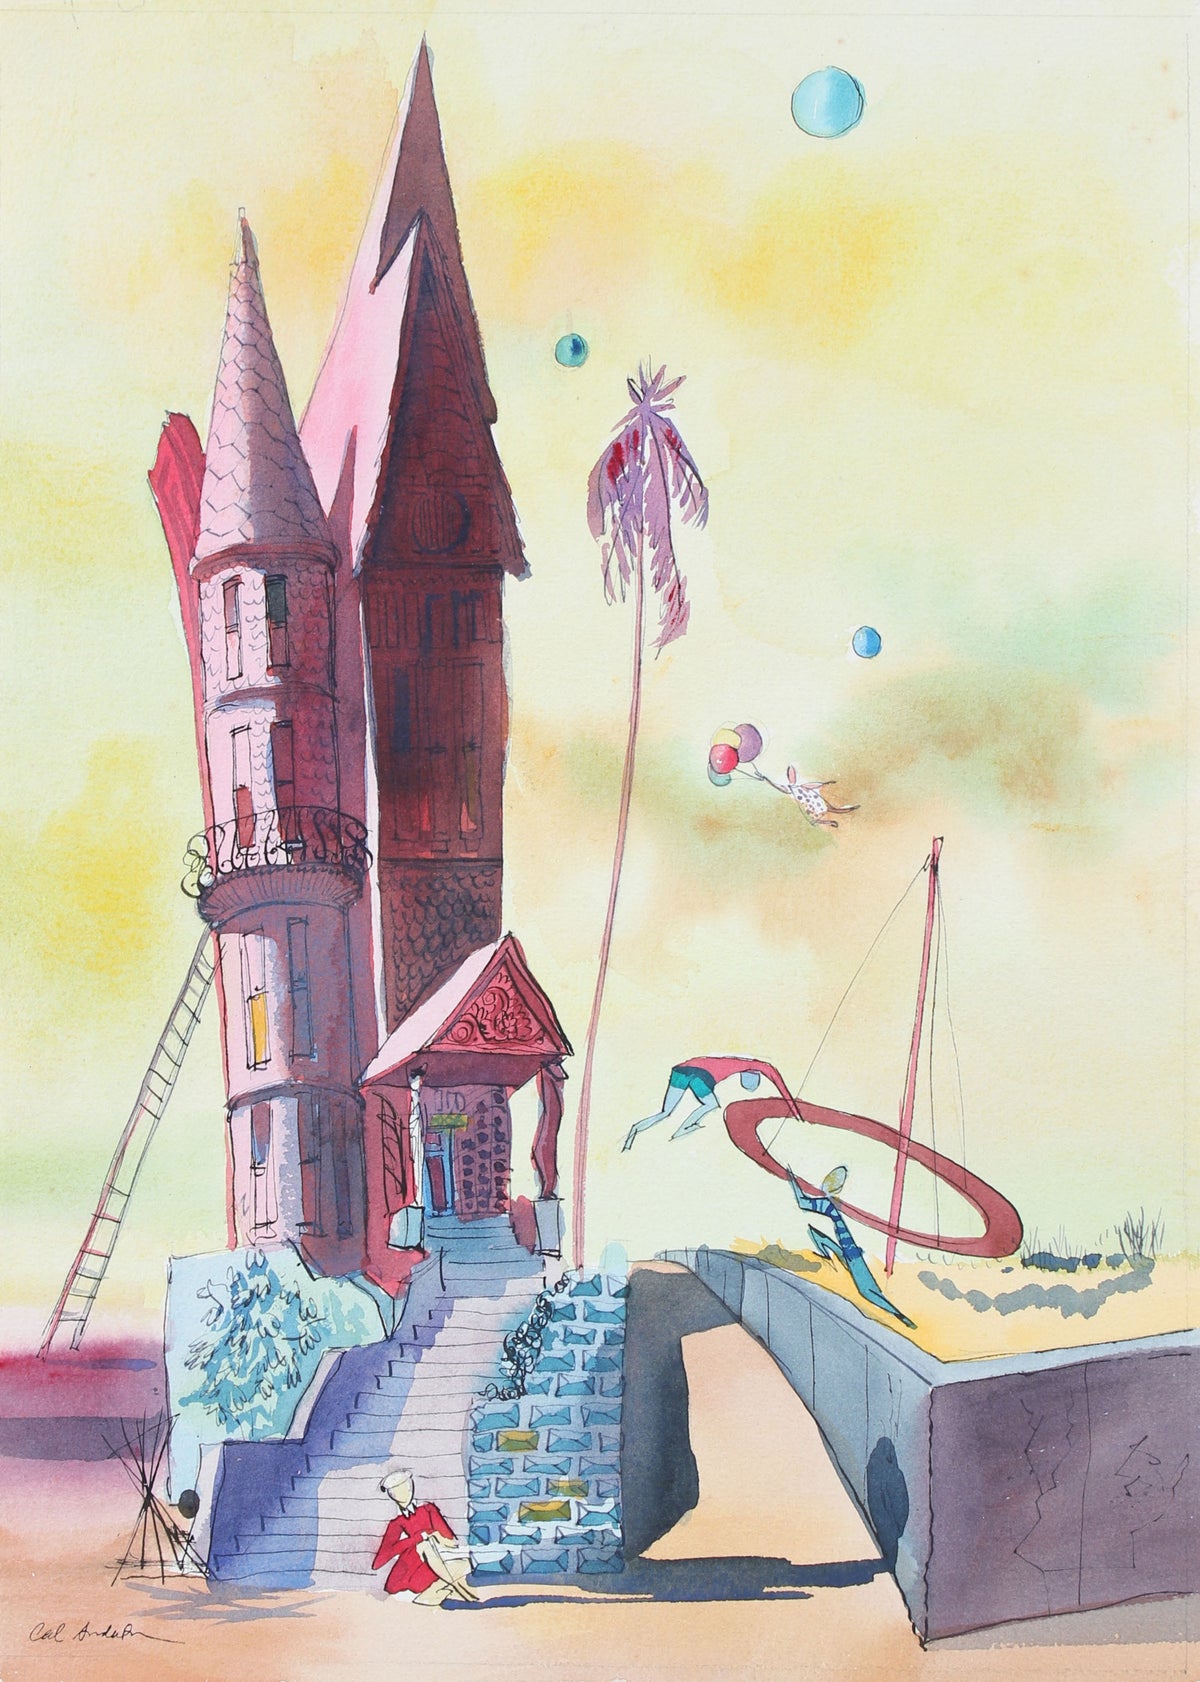 Colorful Surrealist Scene&lt;br&gt;Mid 20th Century Watercolor and Ink&lt;br&gt;&lt;br&gt;#97571